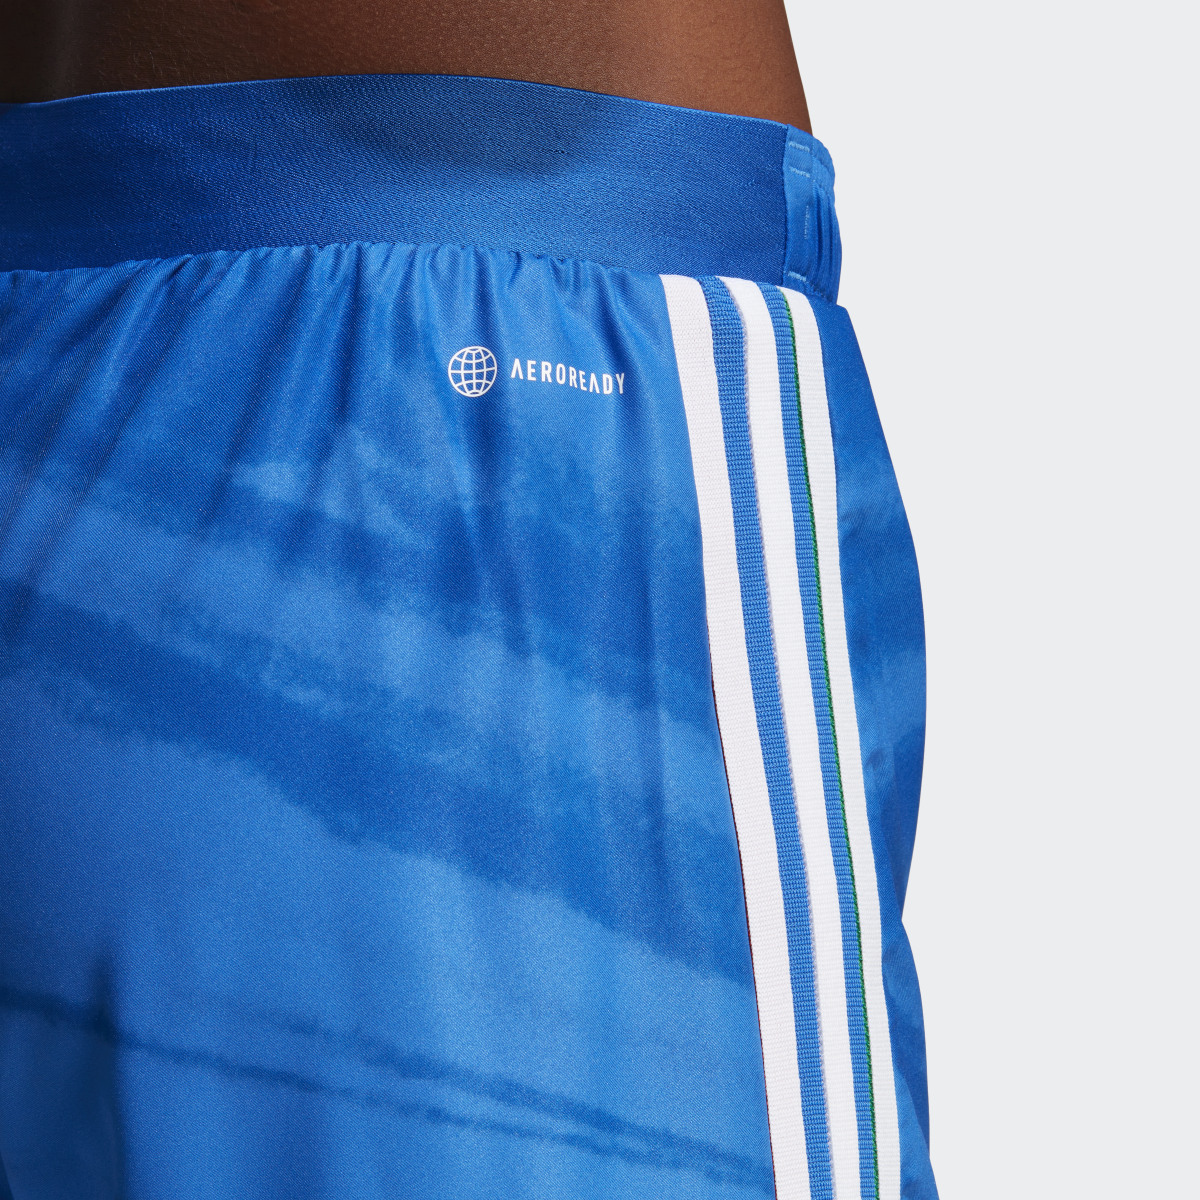 Adidas Italy Women's Team 23 Home Authentic Shorts. 6